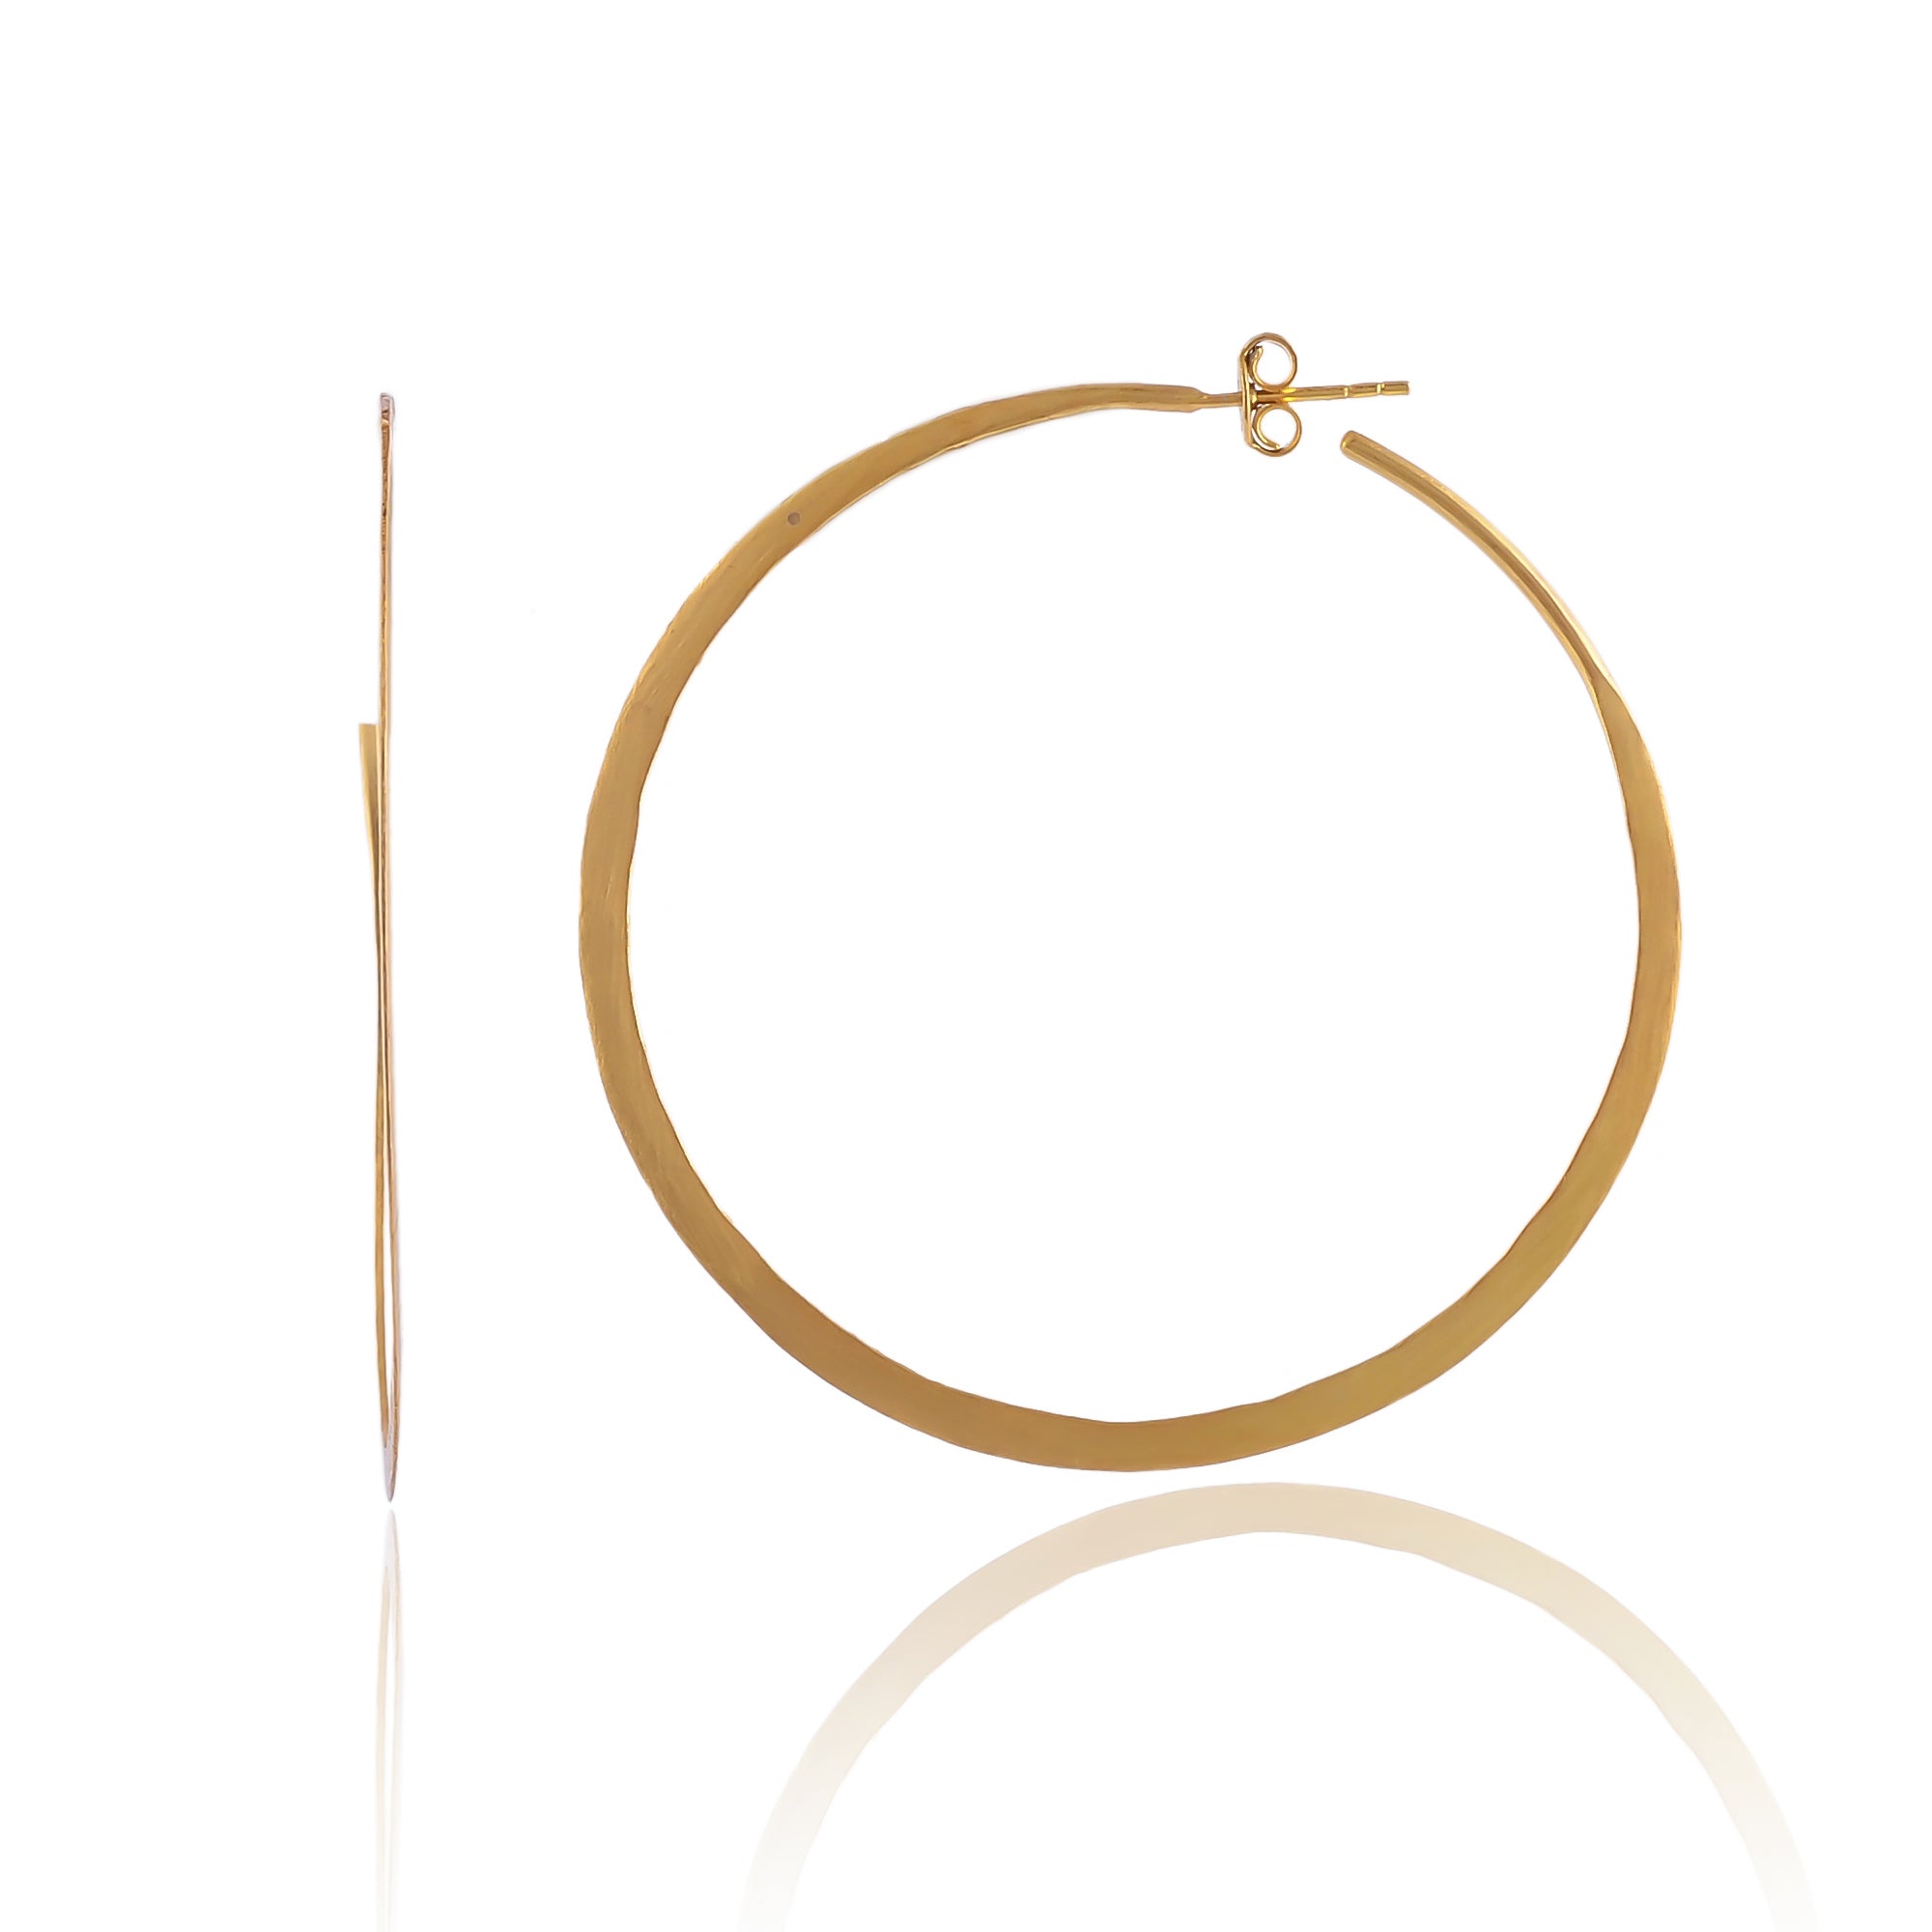 Buy Hand Crafted Silver Gold Plated Hoop